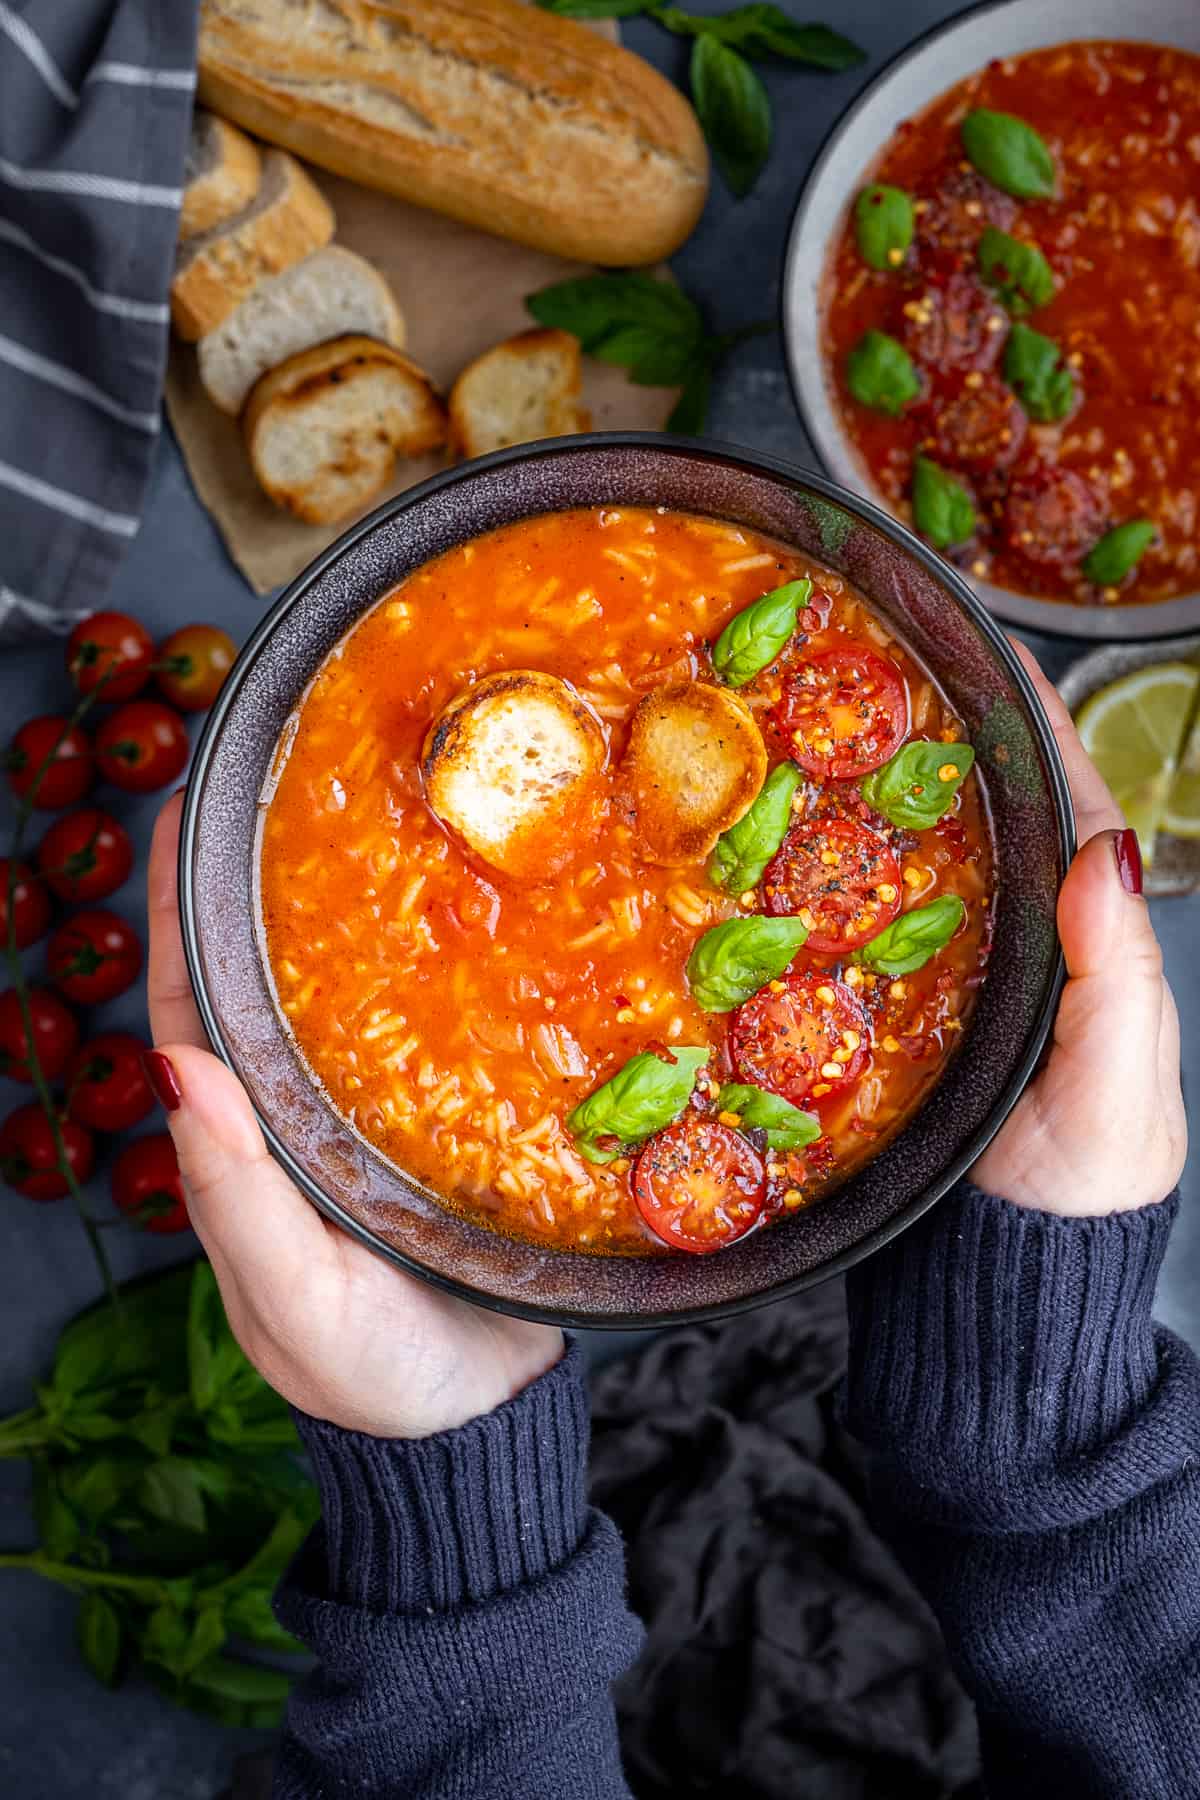 Hands holding a bowl of tomato rice soup topped with fresh basil leaves, halved cherry tomatoes and toasted bread pieces.